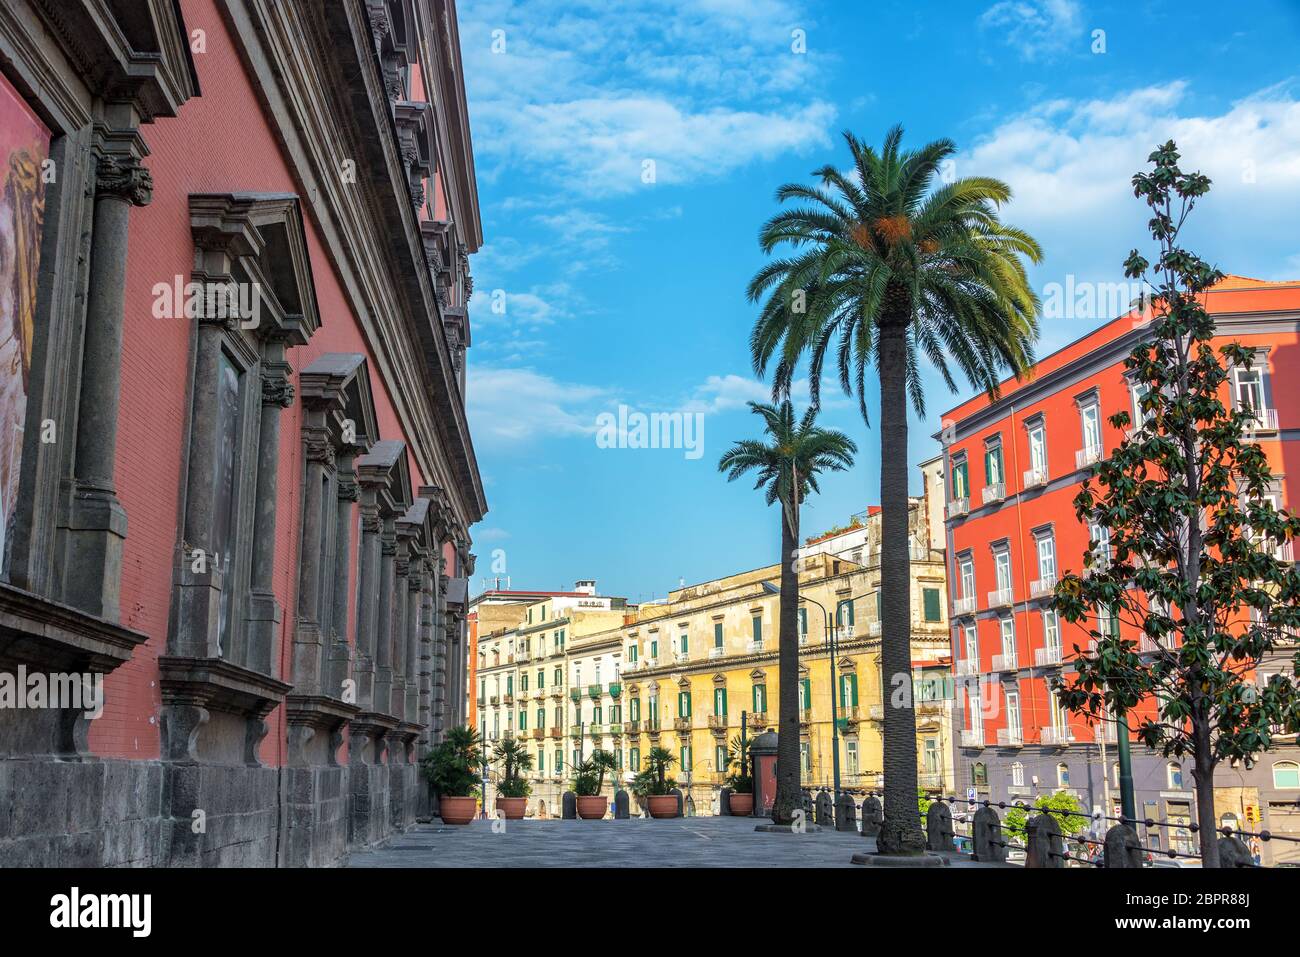 Colorful and beautiful architecture with palm trees in front of the National Archaeological Museum in Naples, Italy Stock Photo